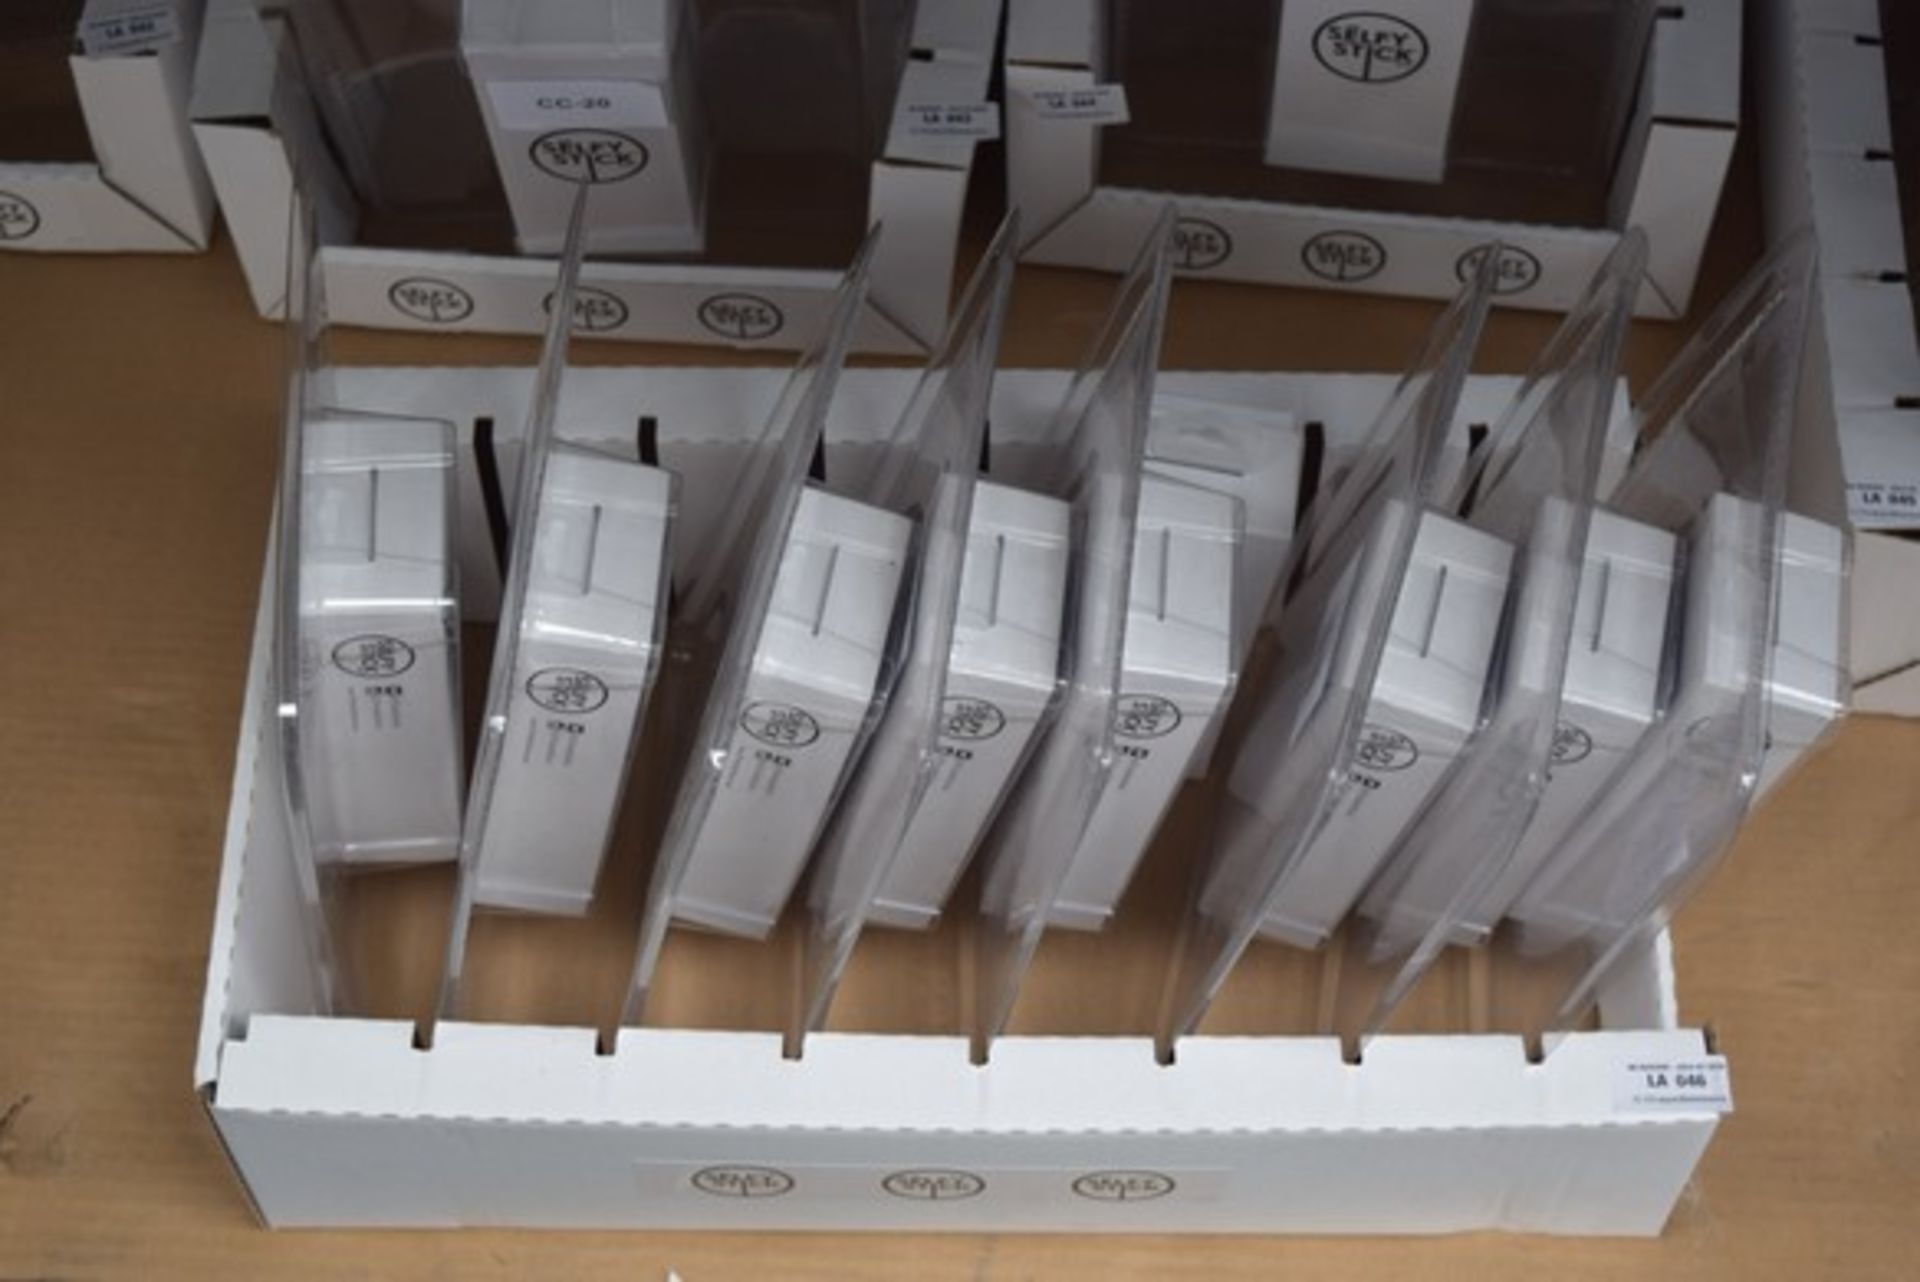 8 x BOXED MANUFACTURE SEALED SELFIE STICK MINIS RRP £12 EACH *PLEASE NOTE THAT THE BID PRICE IS